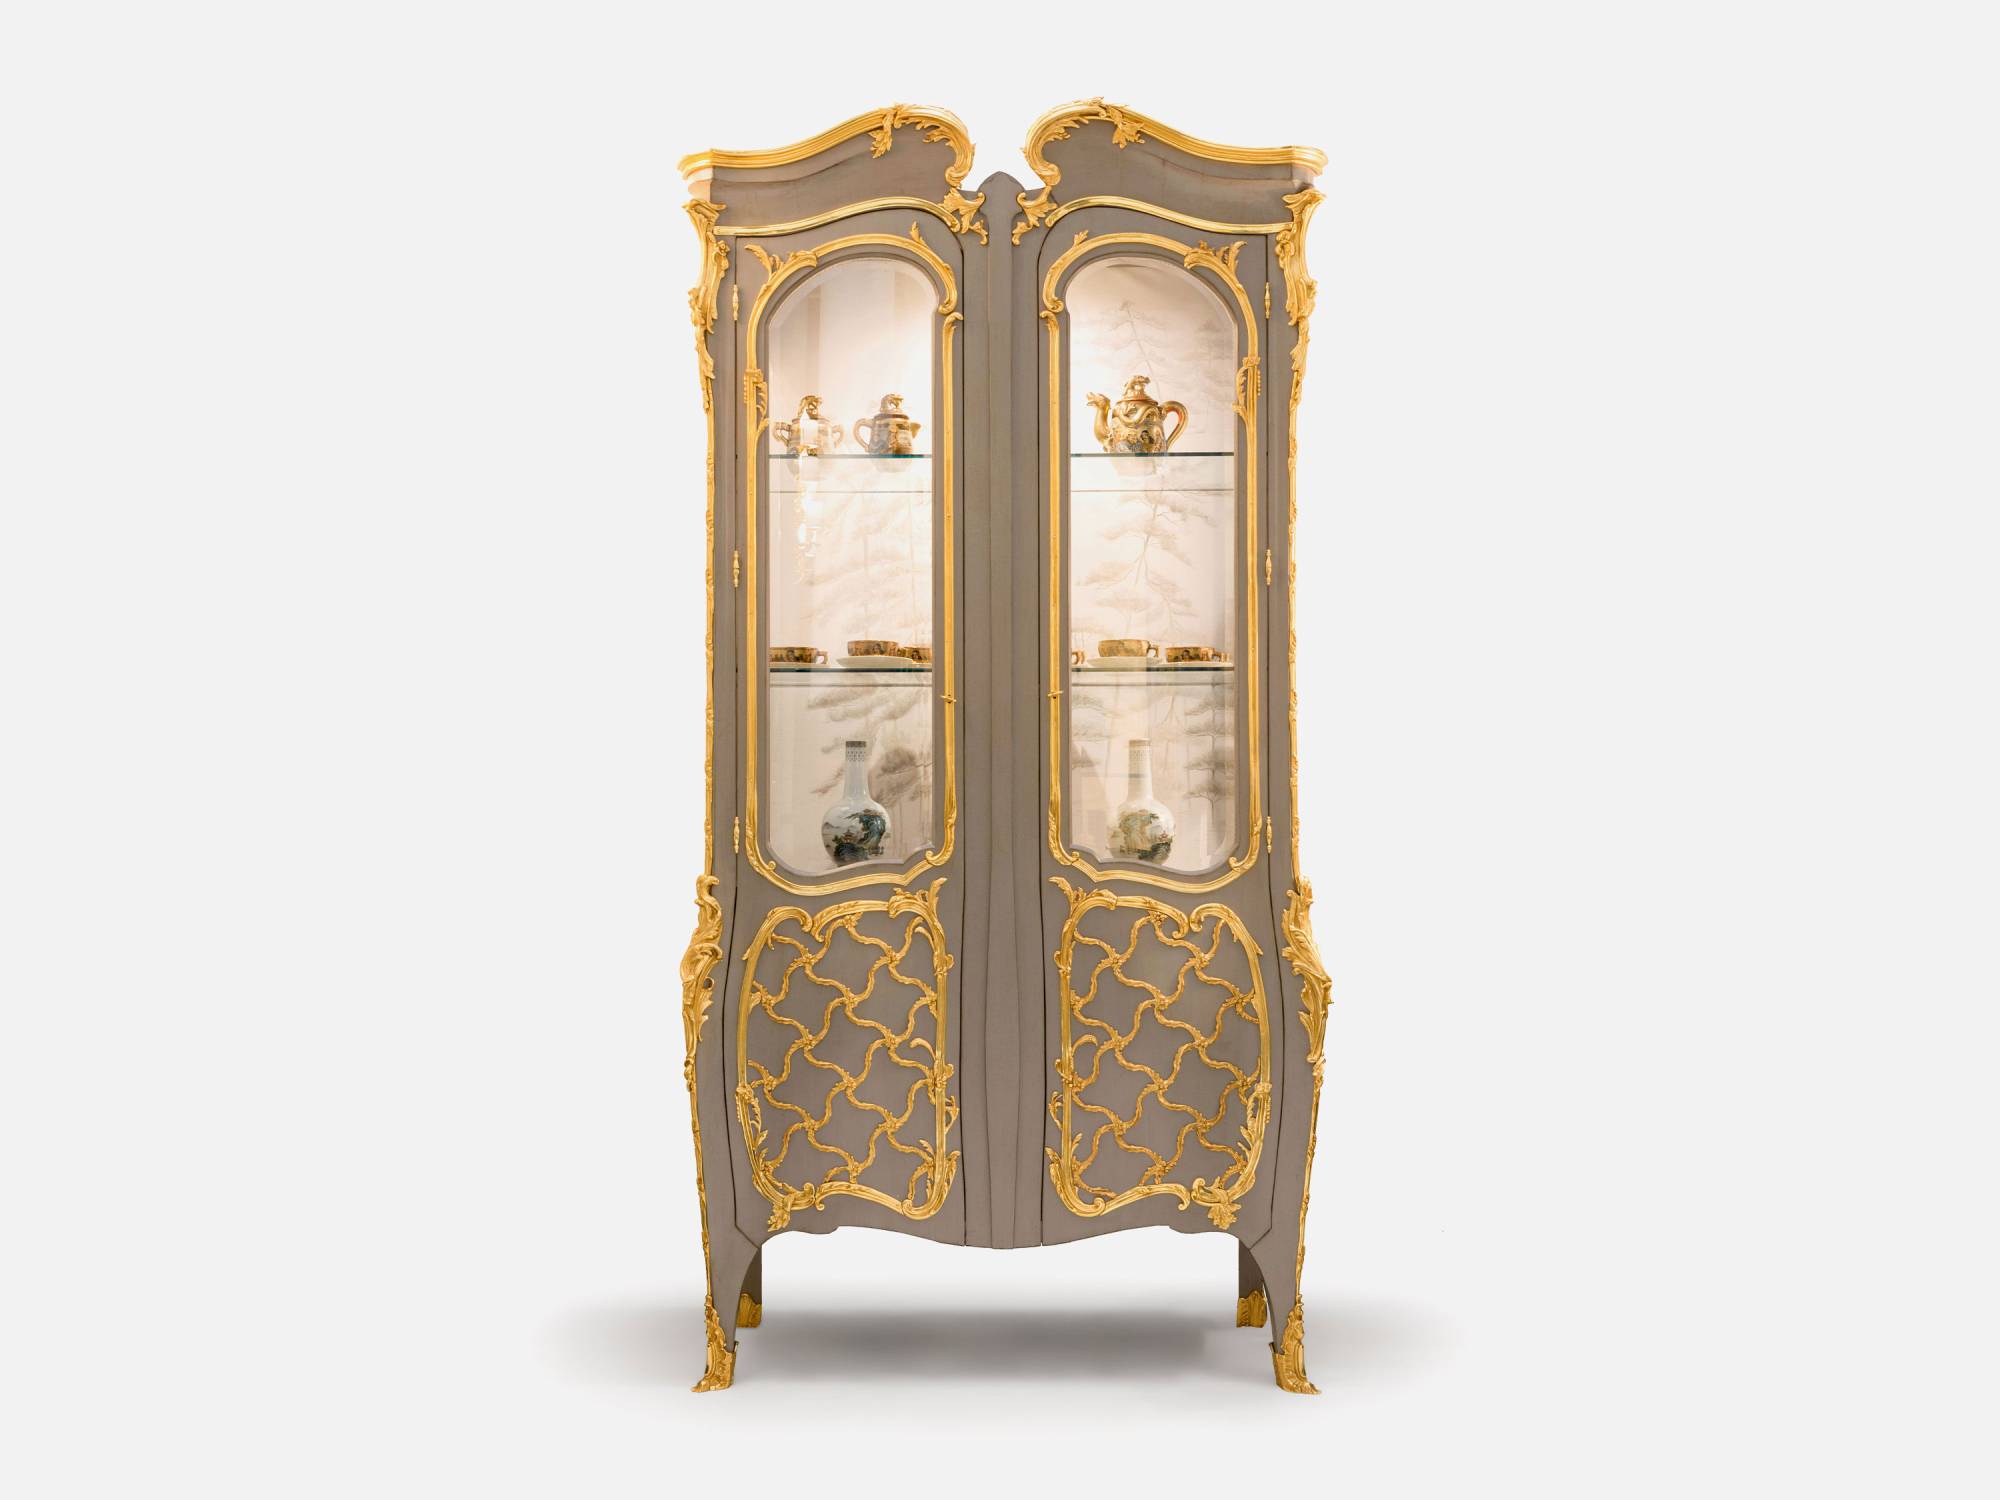 ART. 709-19 – Discover the elegance of luxury classic Showcases and Bookcases made in Italy by C.G. Capelletti. Luxury classic furniture that combines style and craftsmanship.